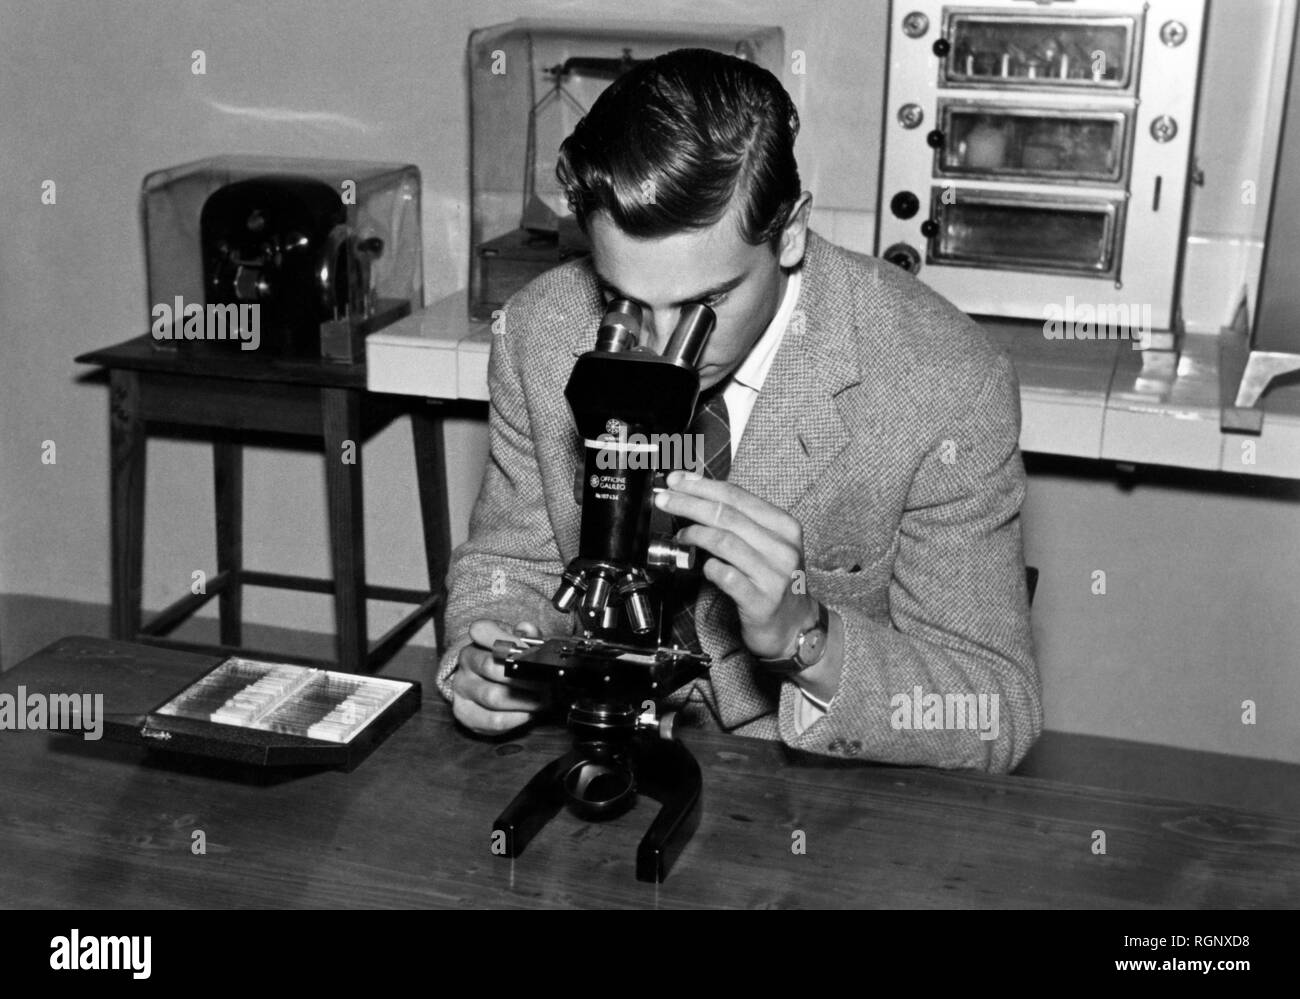 L'homme, microscope, 1957 Banque D'Images